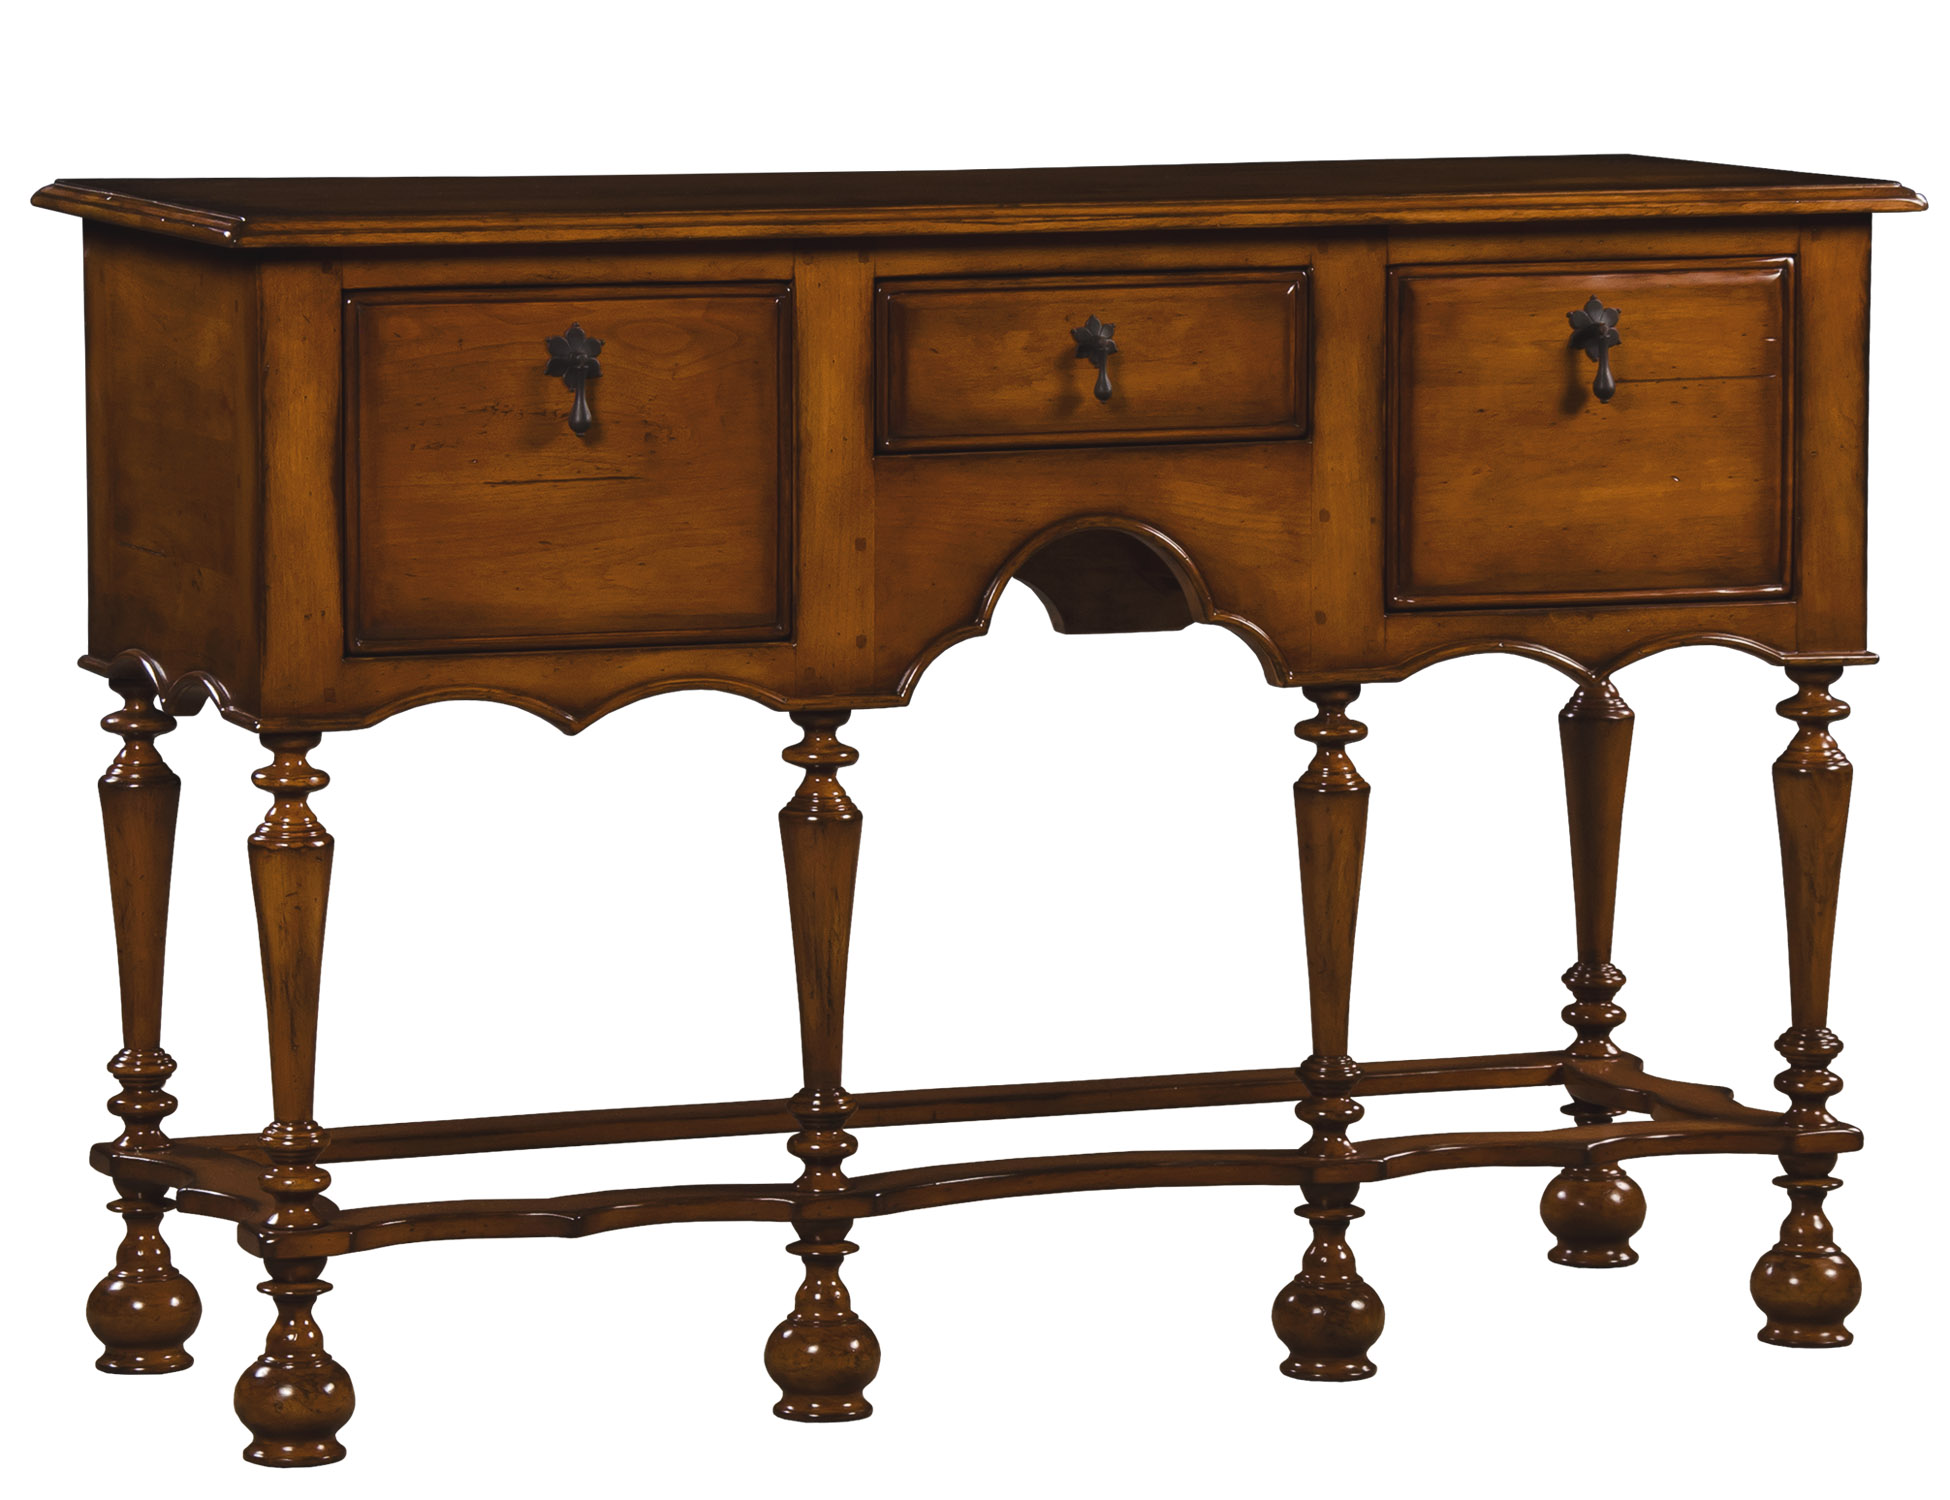 Ravanel traditional console sofa table with drawers by Woodland furniture in Idaho Falls